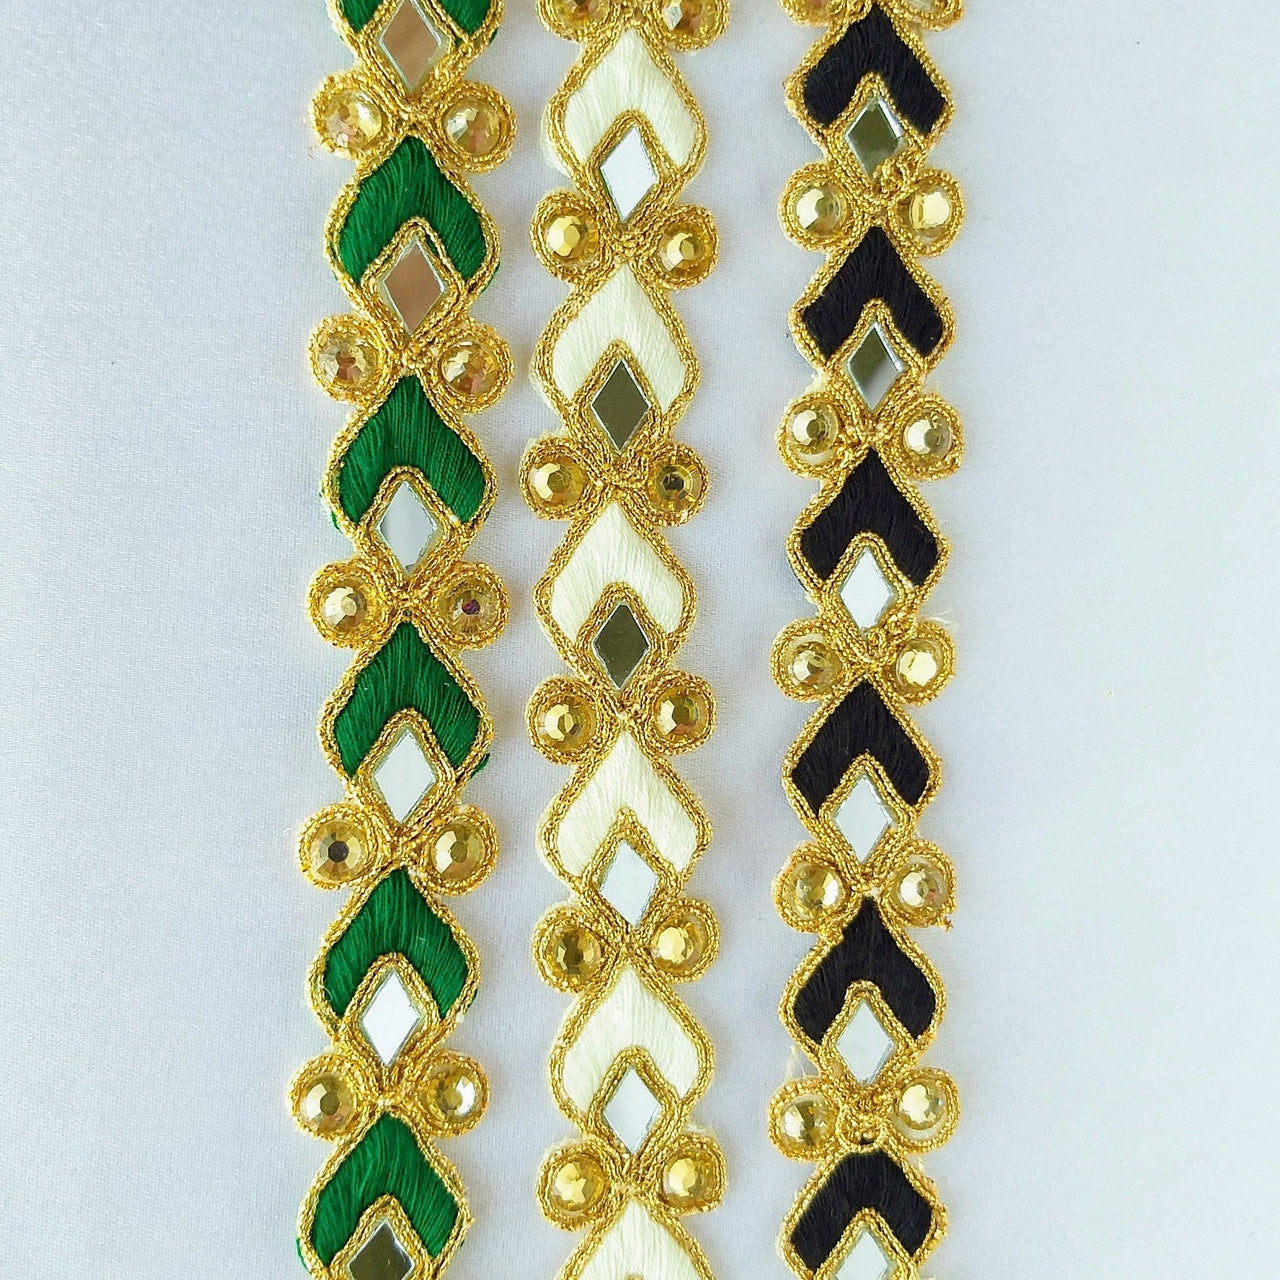 Green / Black / Off White And Gold Thread Lace Trim With Beads And Mirrors Embellishments, Approx. 22mm - 210119L524 / 25 /26